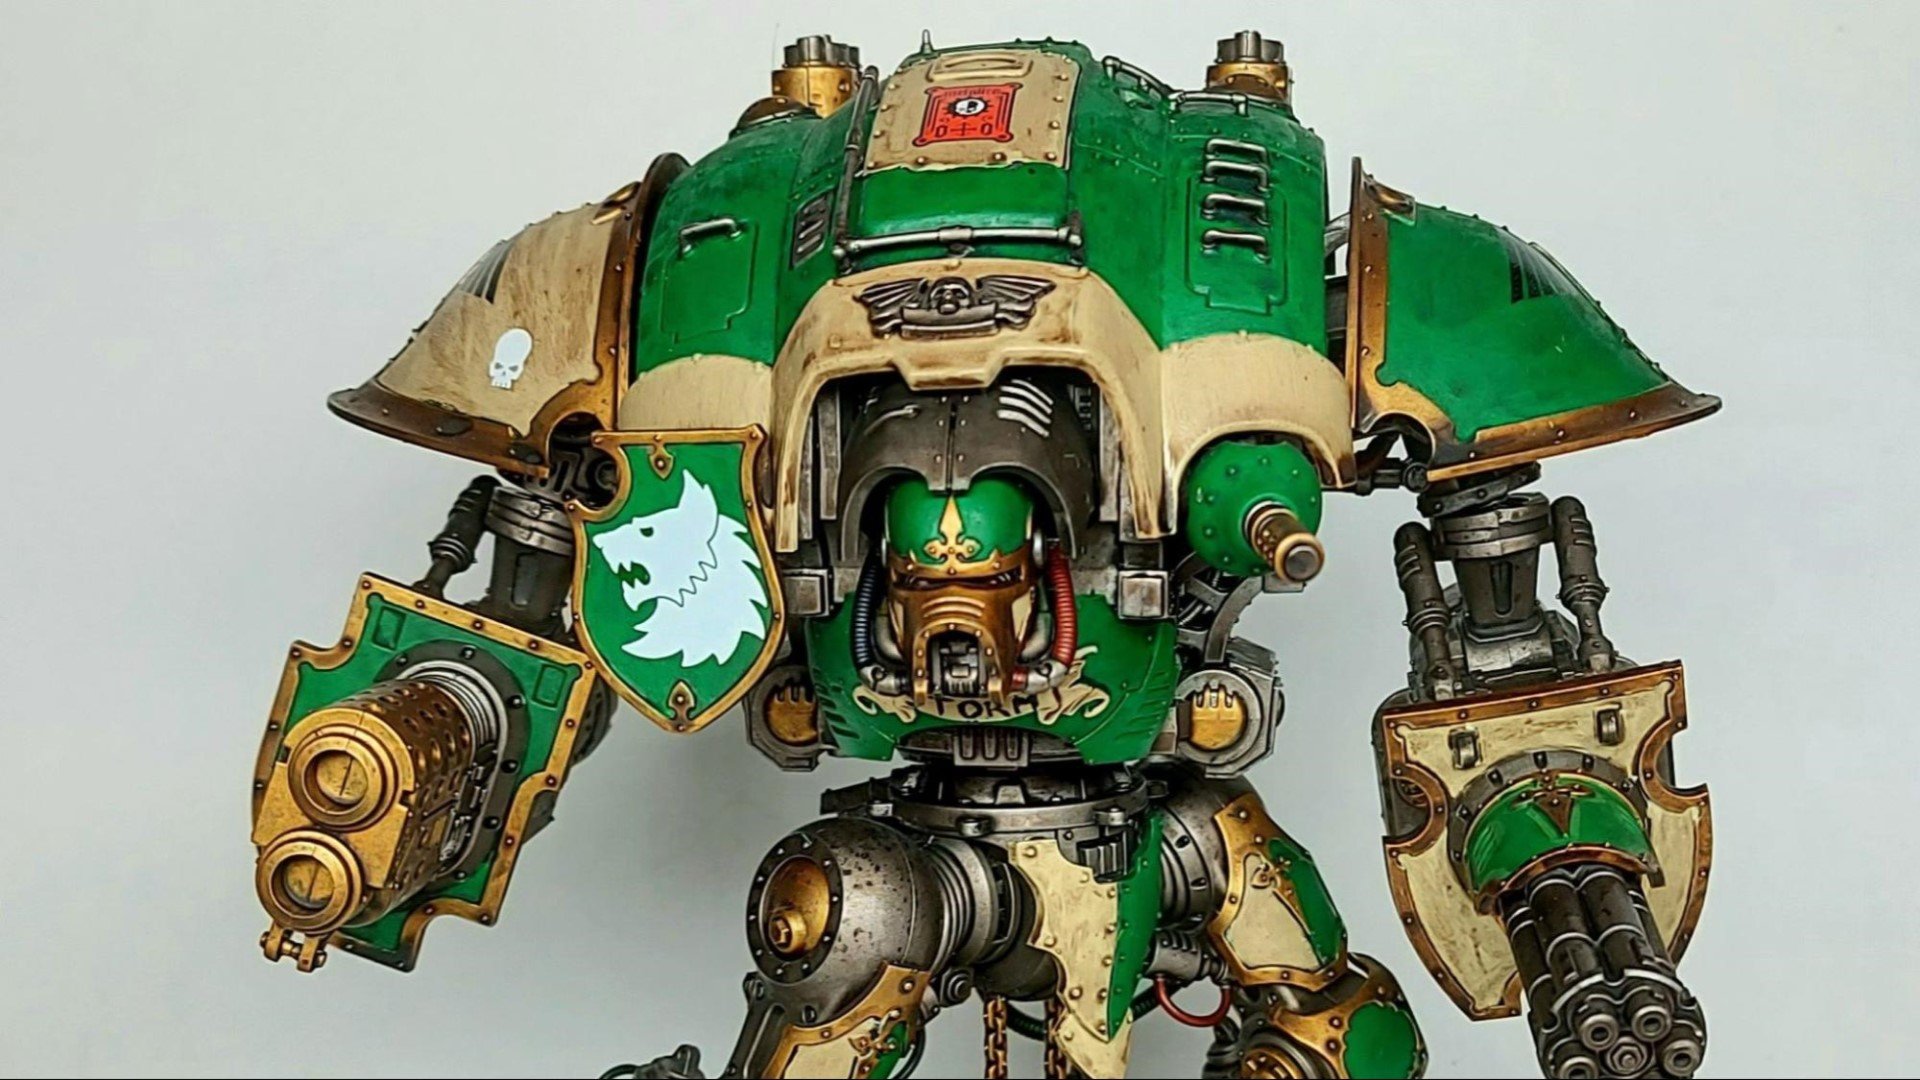 Warhammer 40k Imperial Knights army guide - Photo provided to the author by Stephen Reynolds showing a questoris knight in green and cream armour